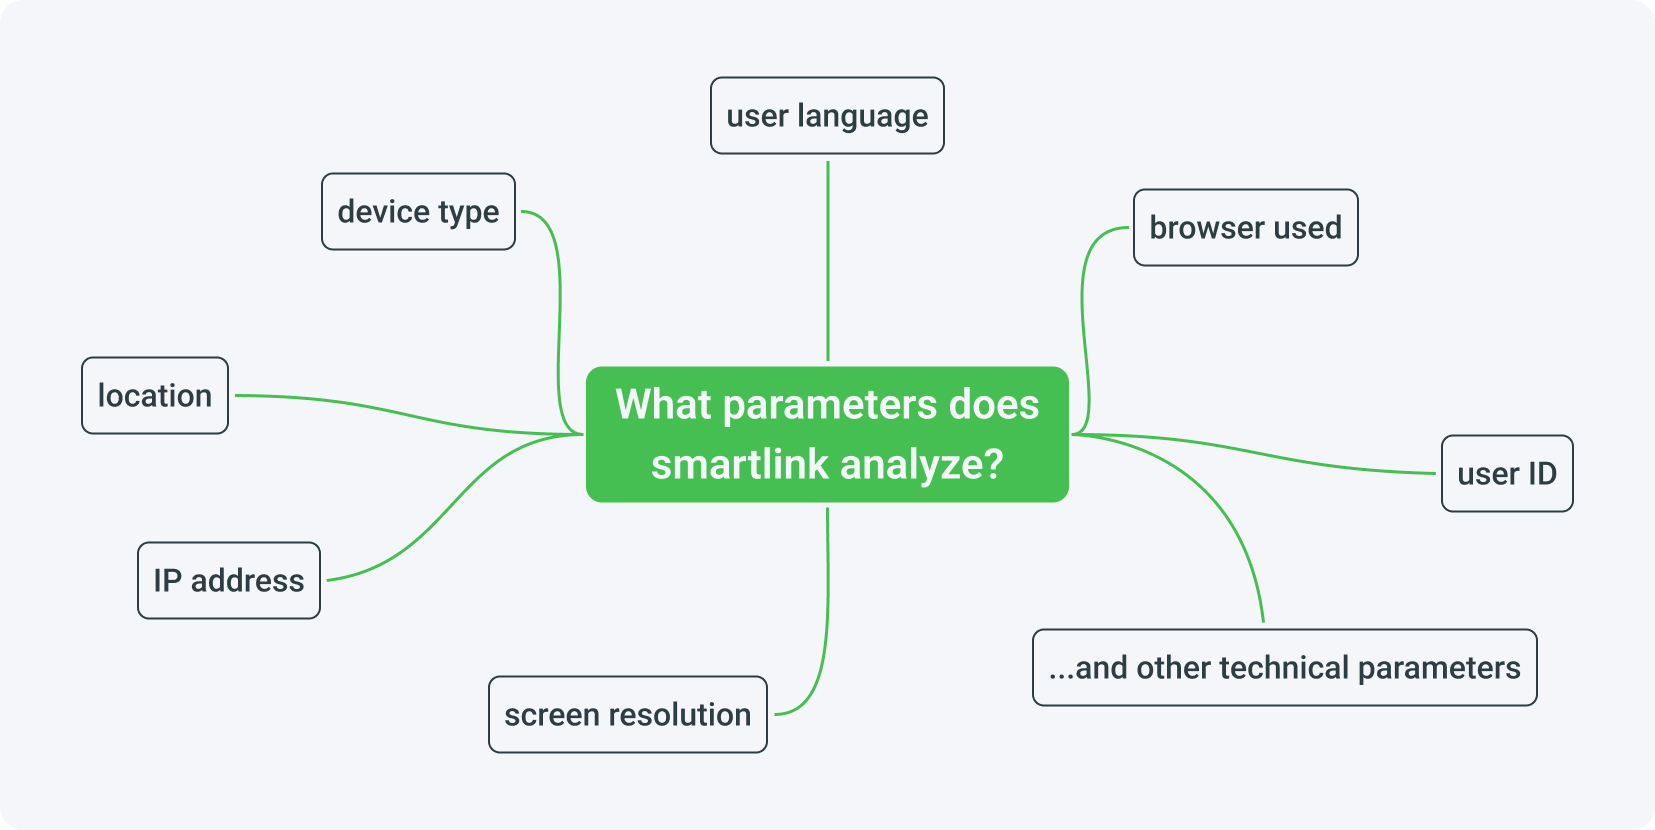 What parameters does smartlink analyze?